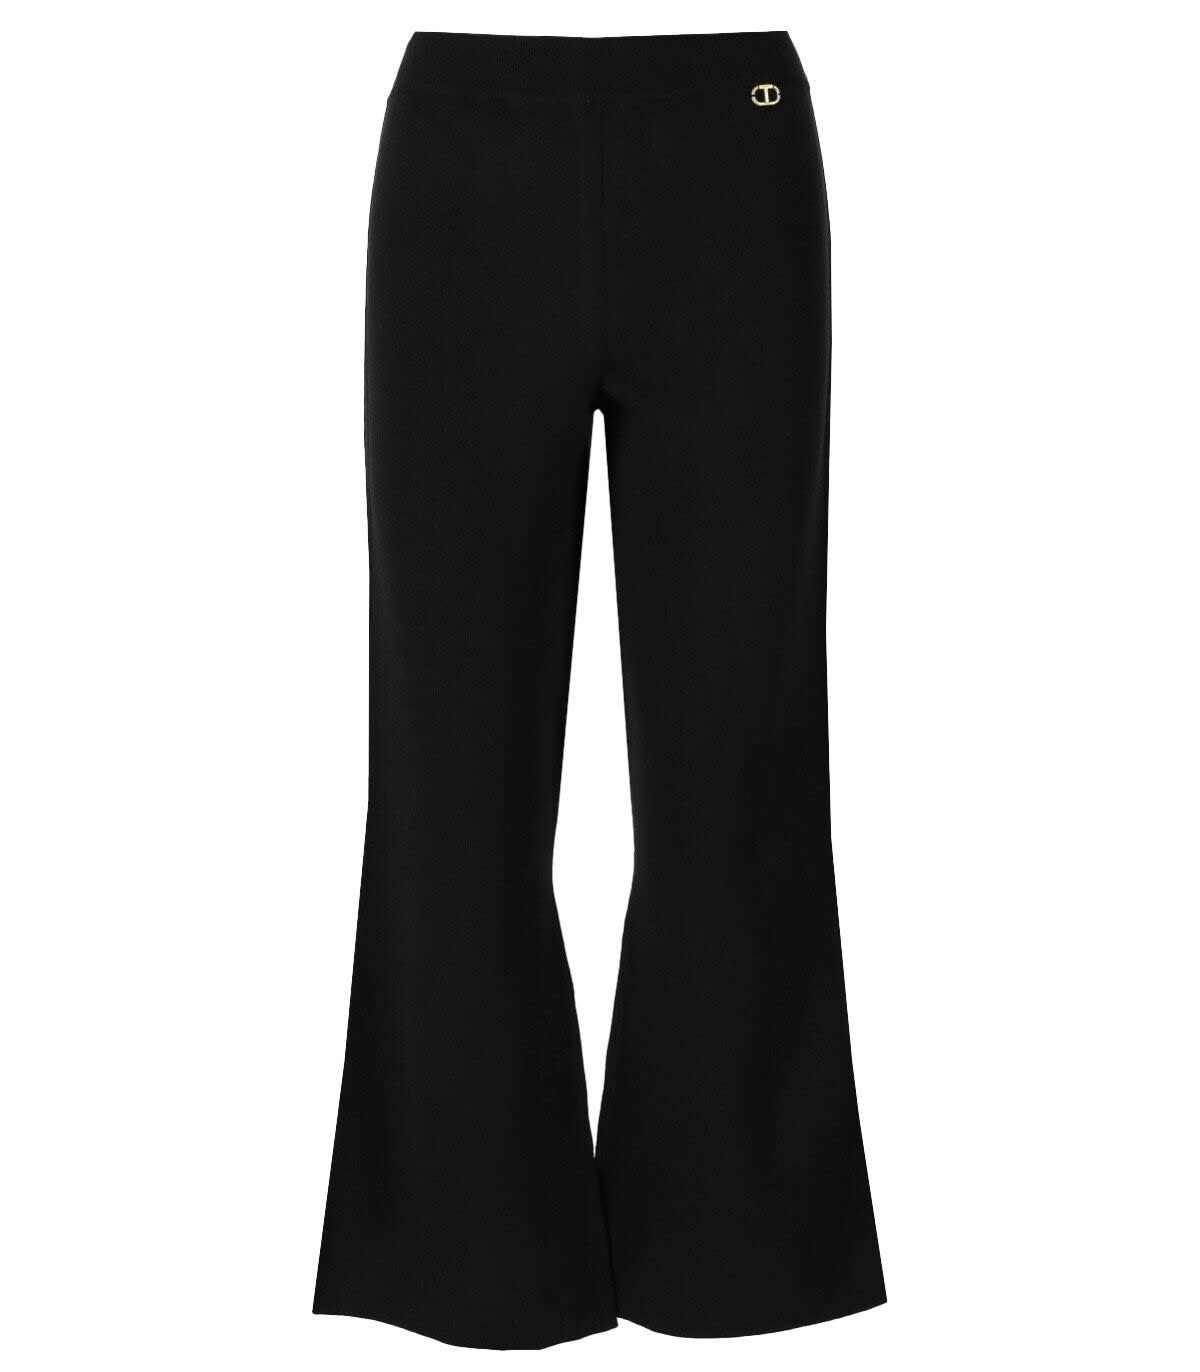 TWINSET TWINSET BLACK KNITTED FLARE TROUSERS